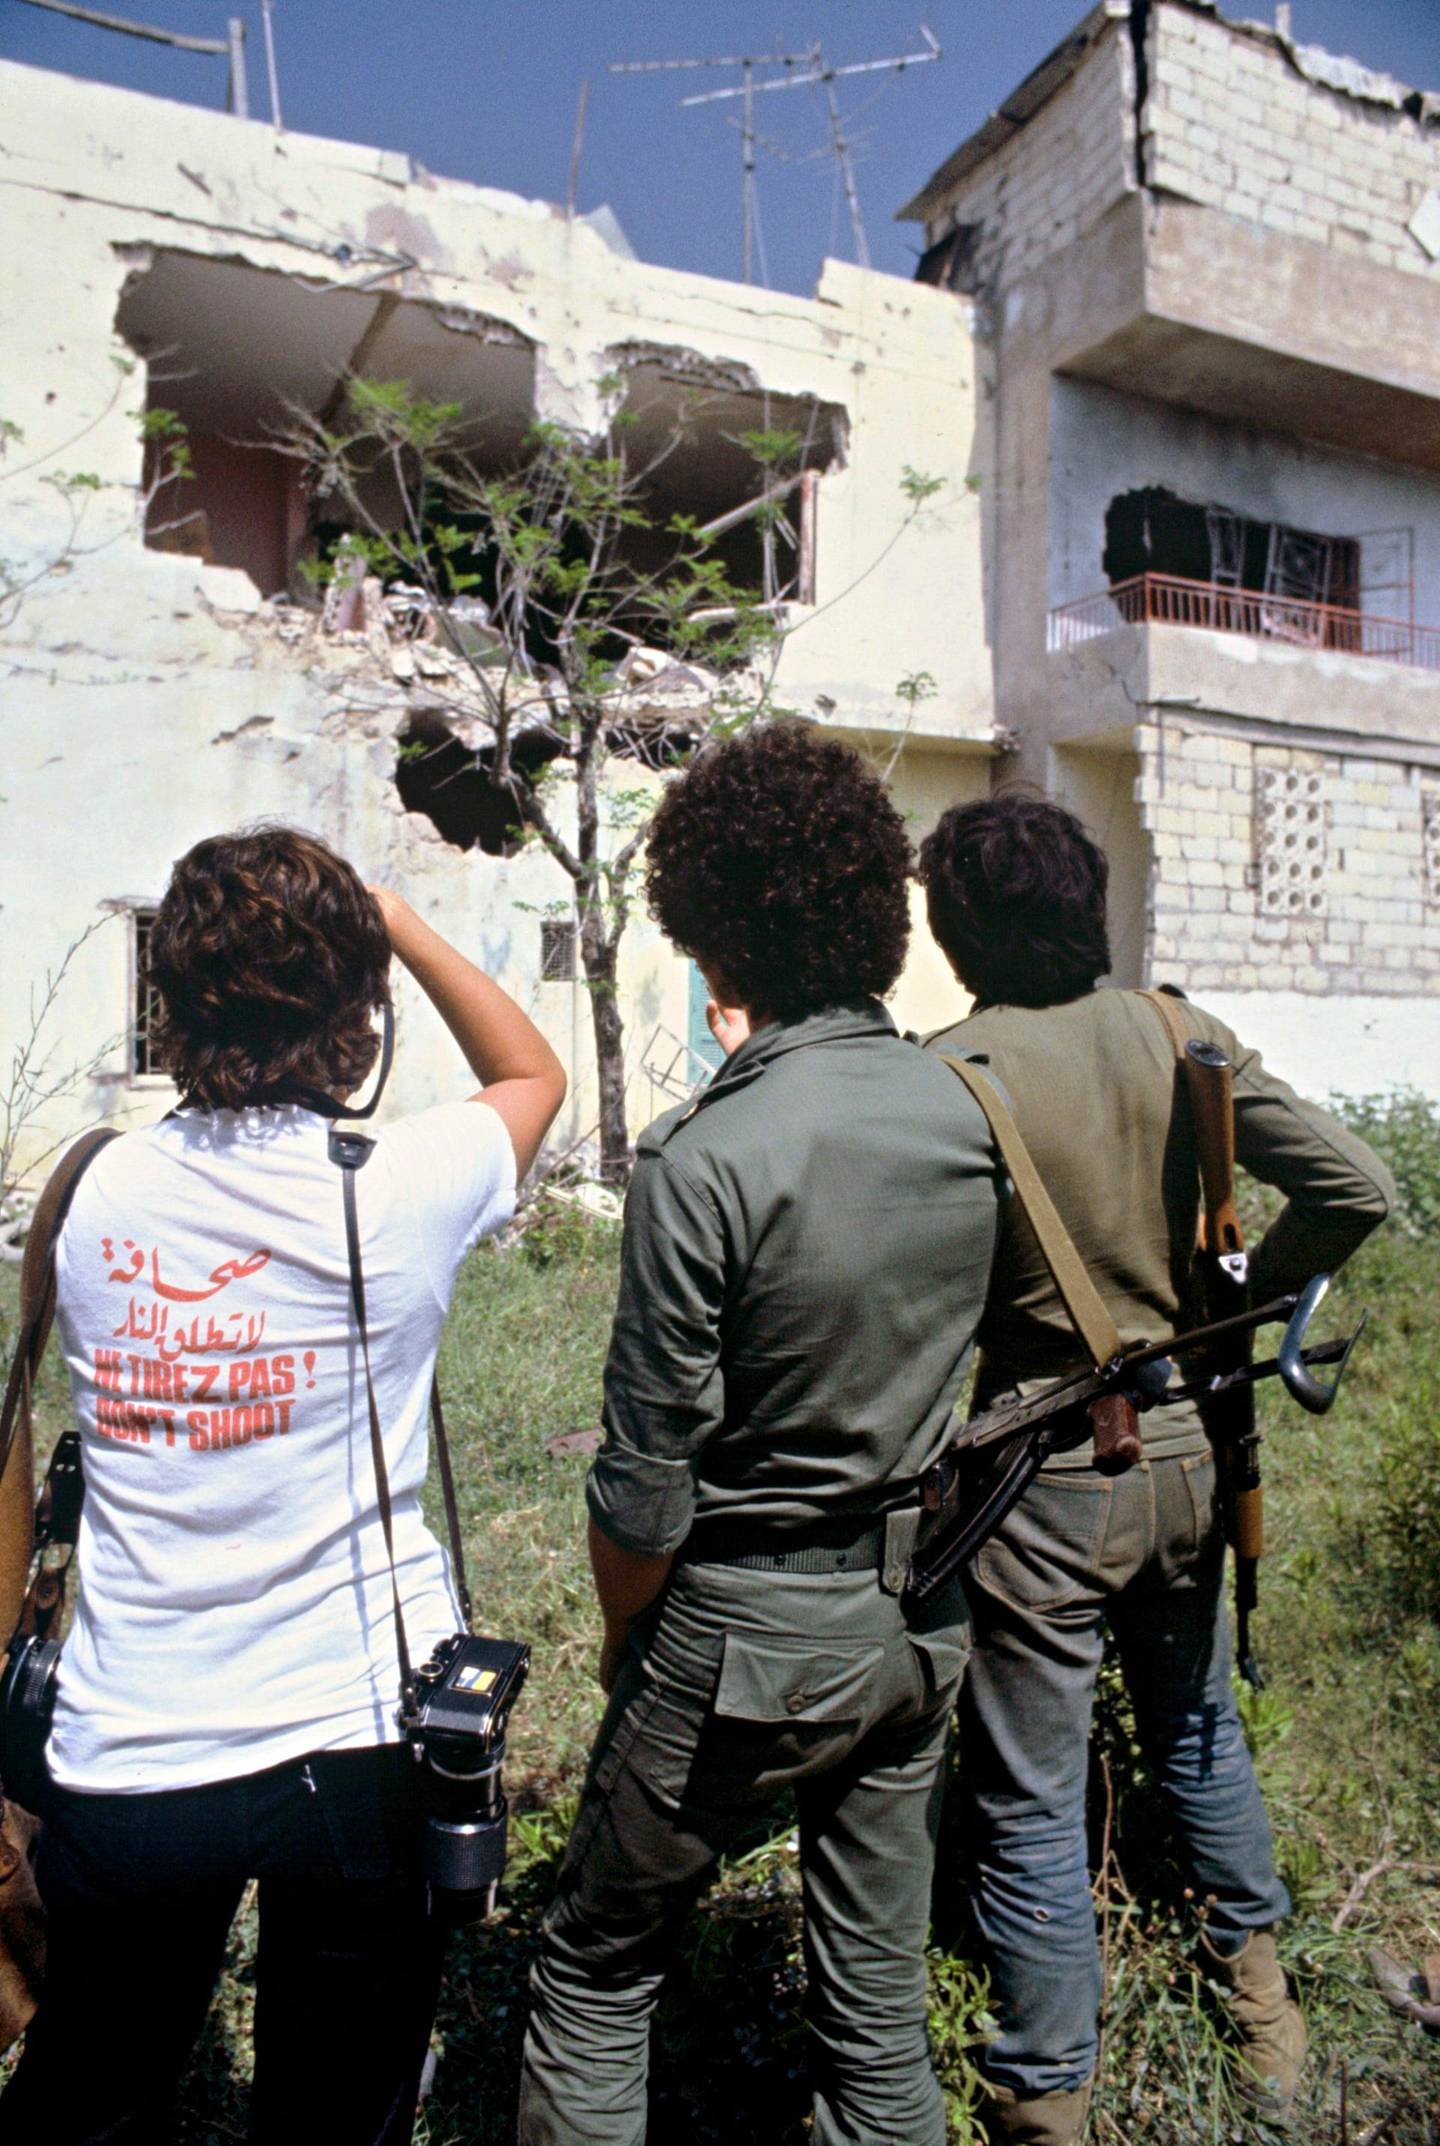 A European photographer wearing the ‘Don’t shoot’ T-shirt in Beirut, 1982. AFP / Getty Images